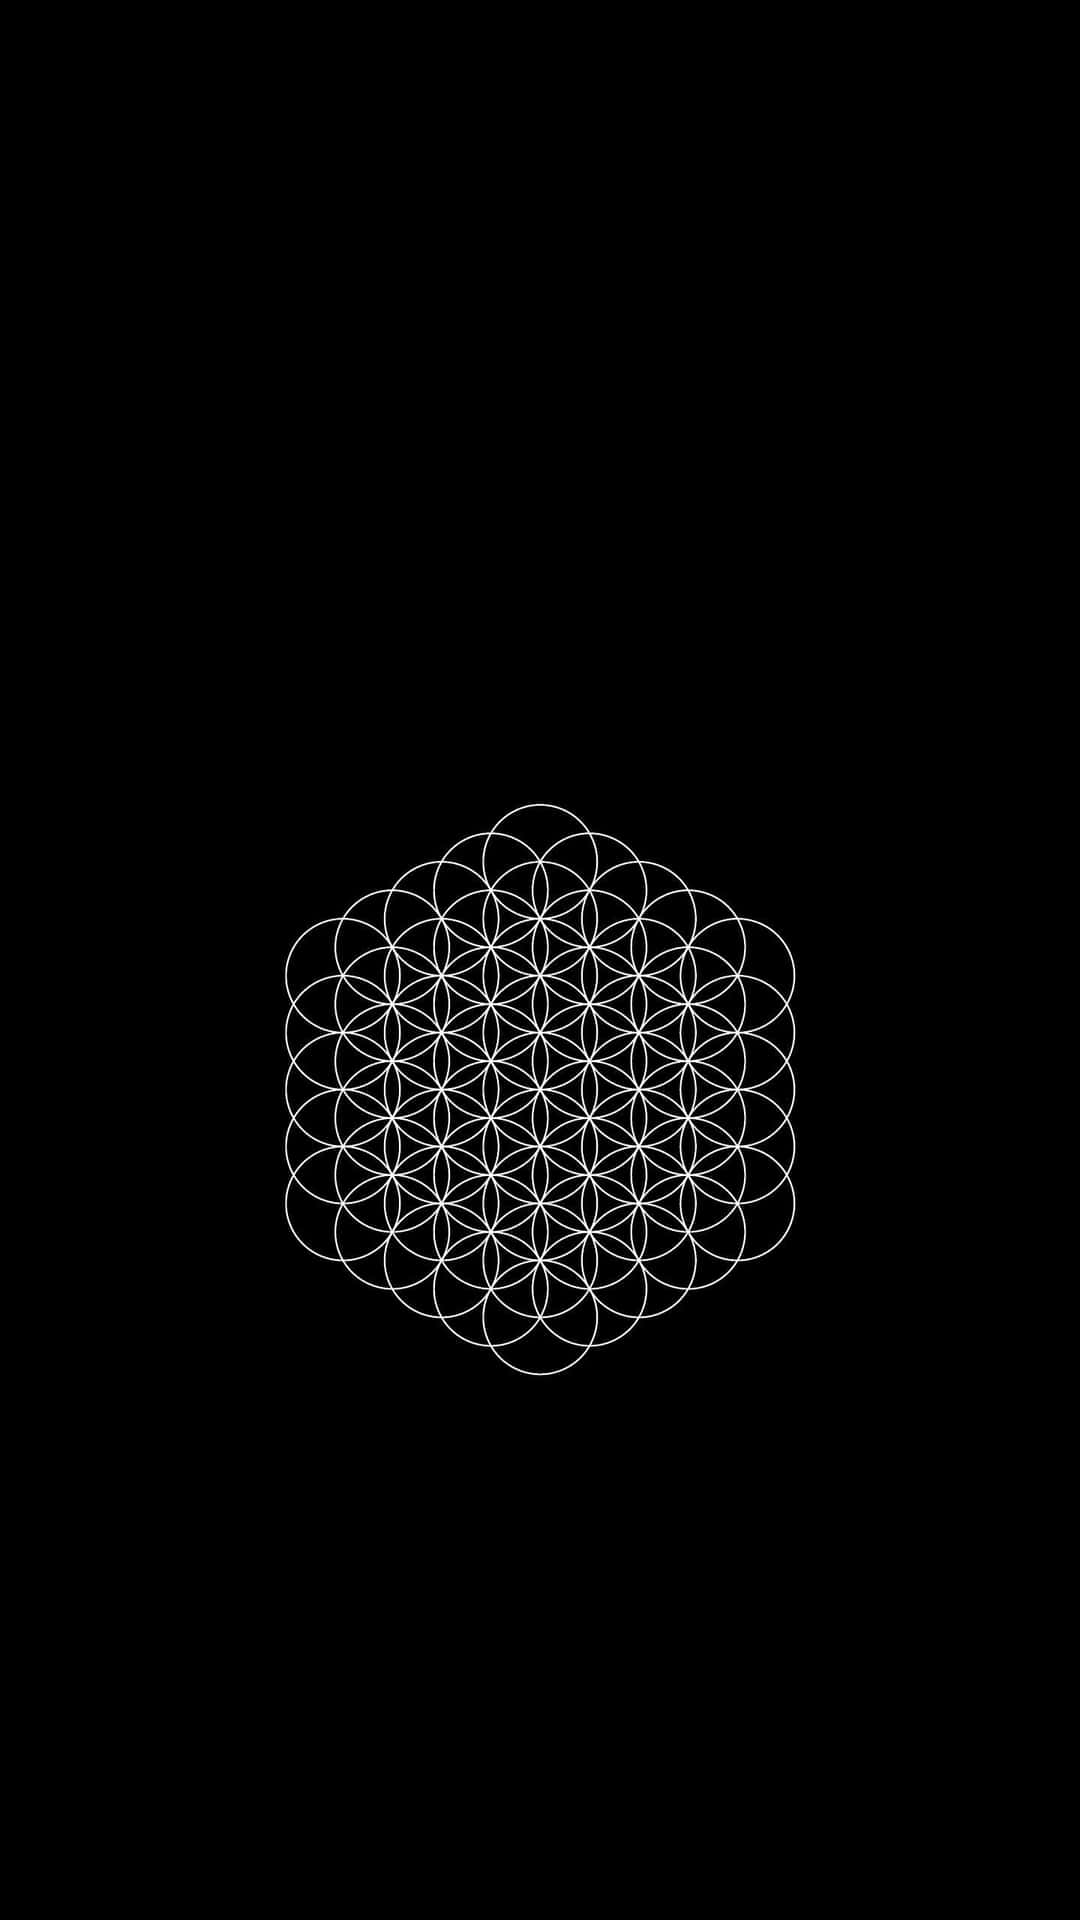 Reaching a Higher Spiritual Plane with the Flower of Life Wallpaper